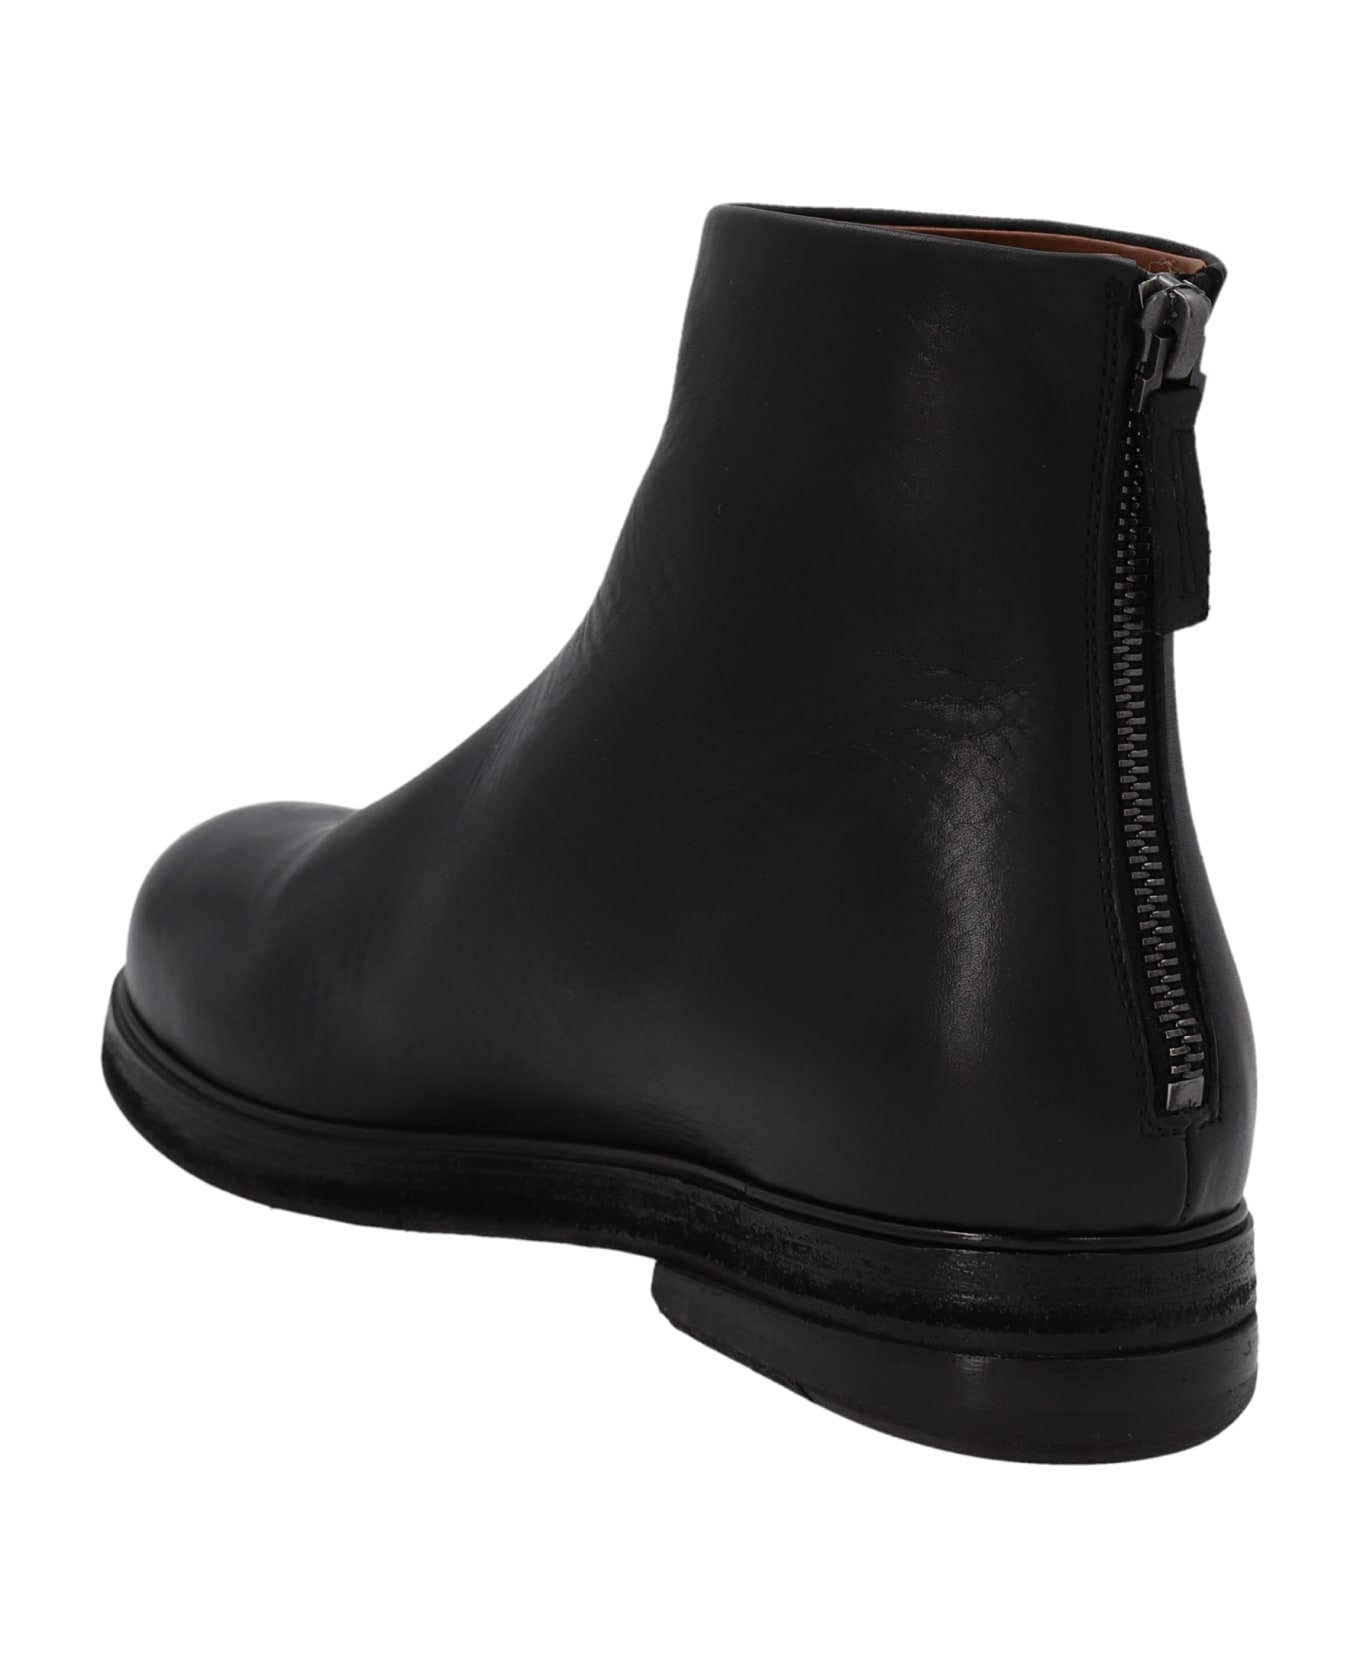 Marsell 'zucca Zeppa  Ankle Boots - Black  